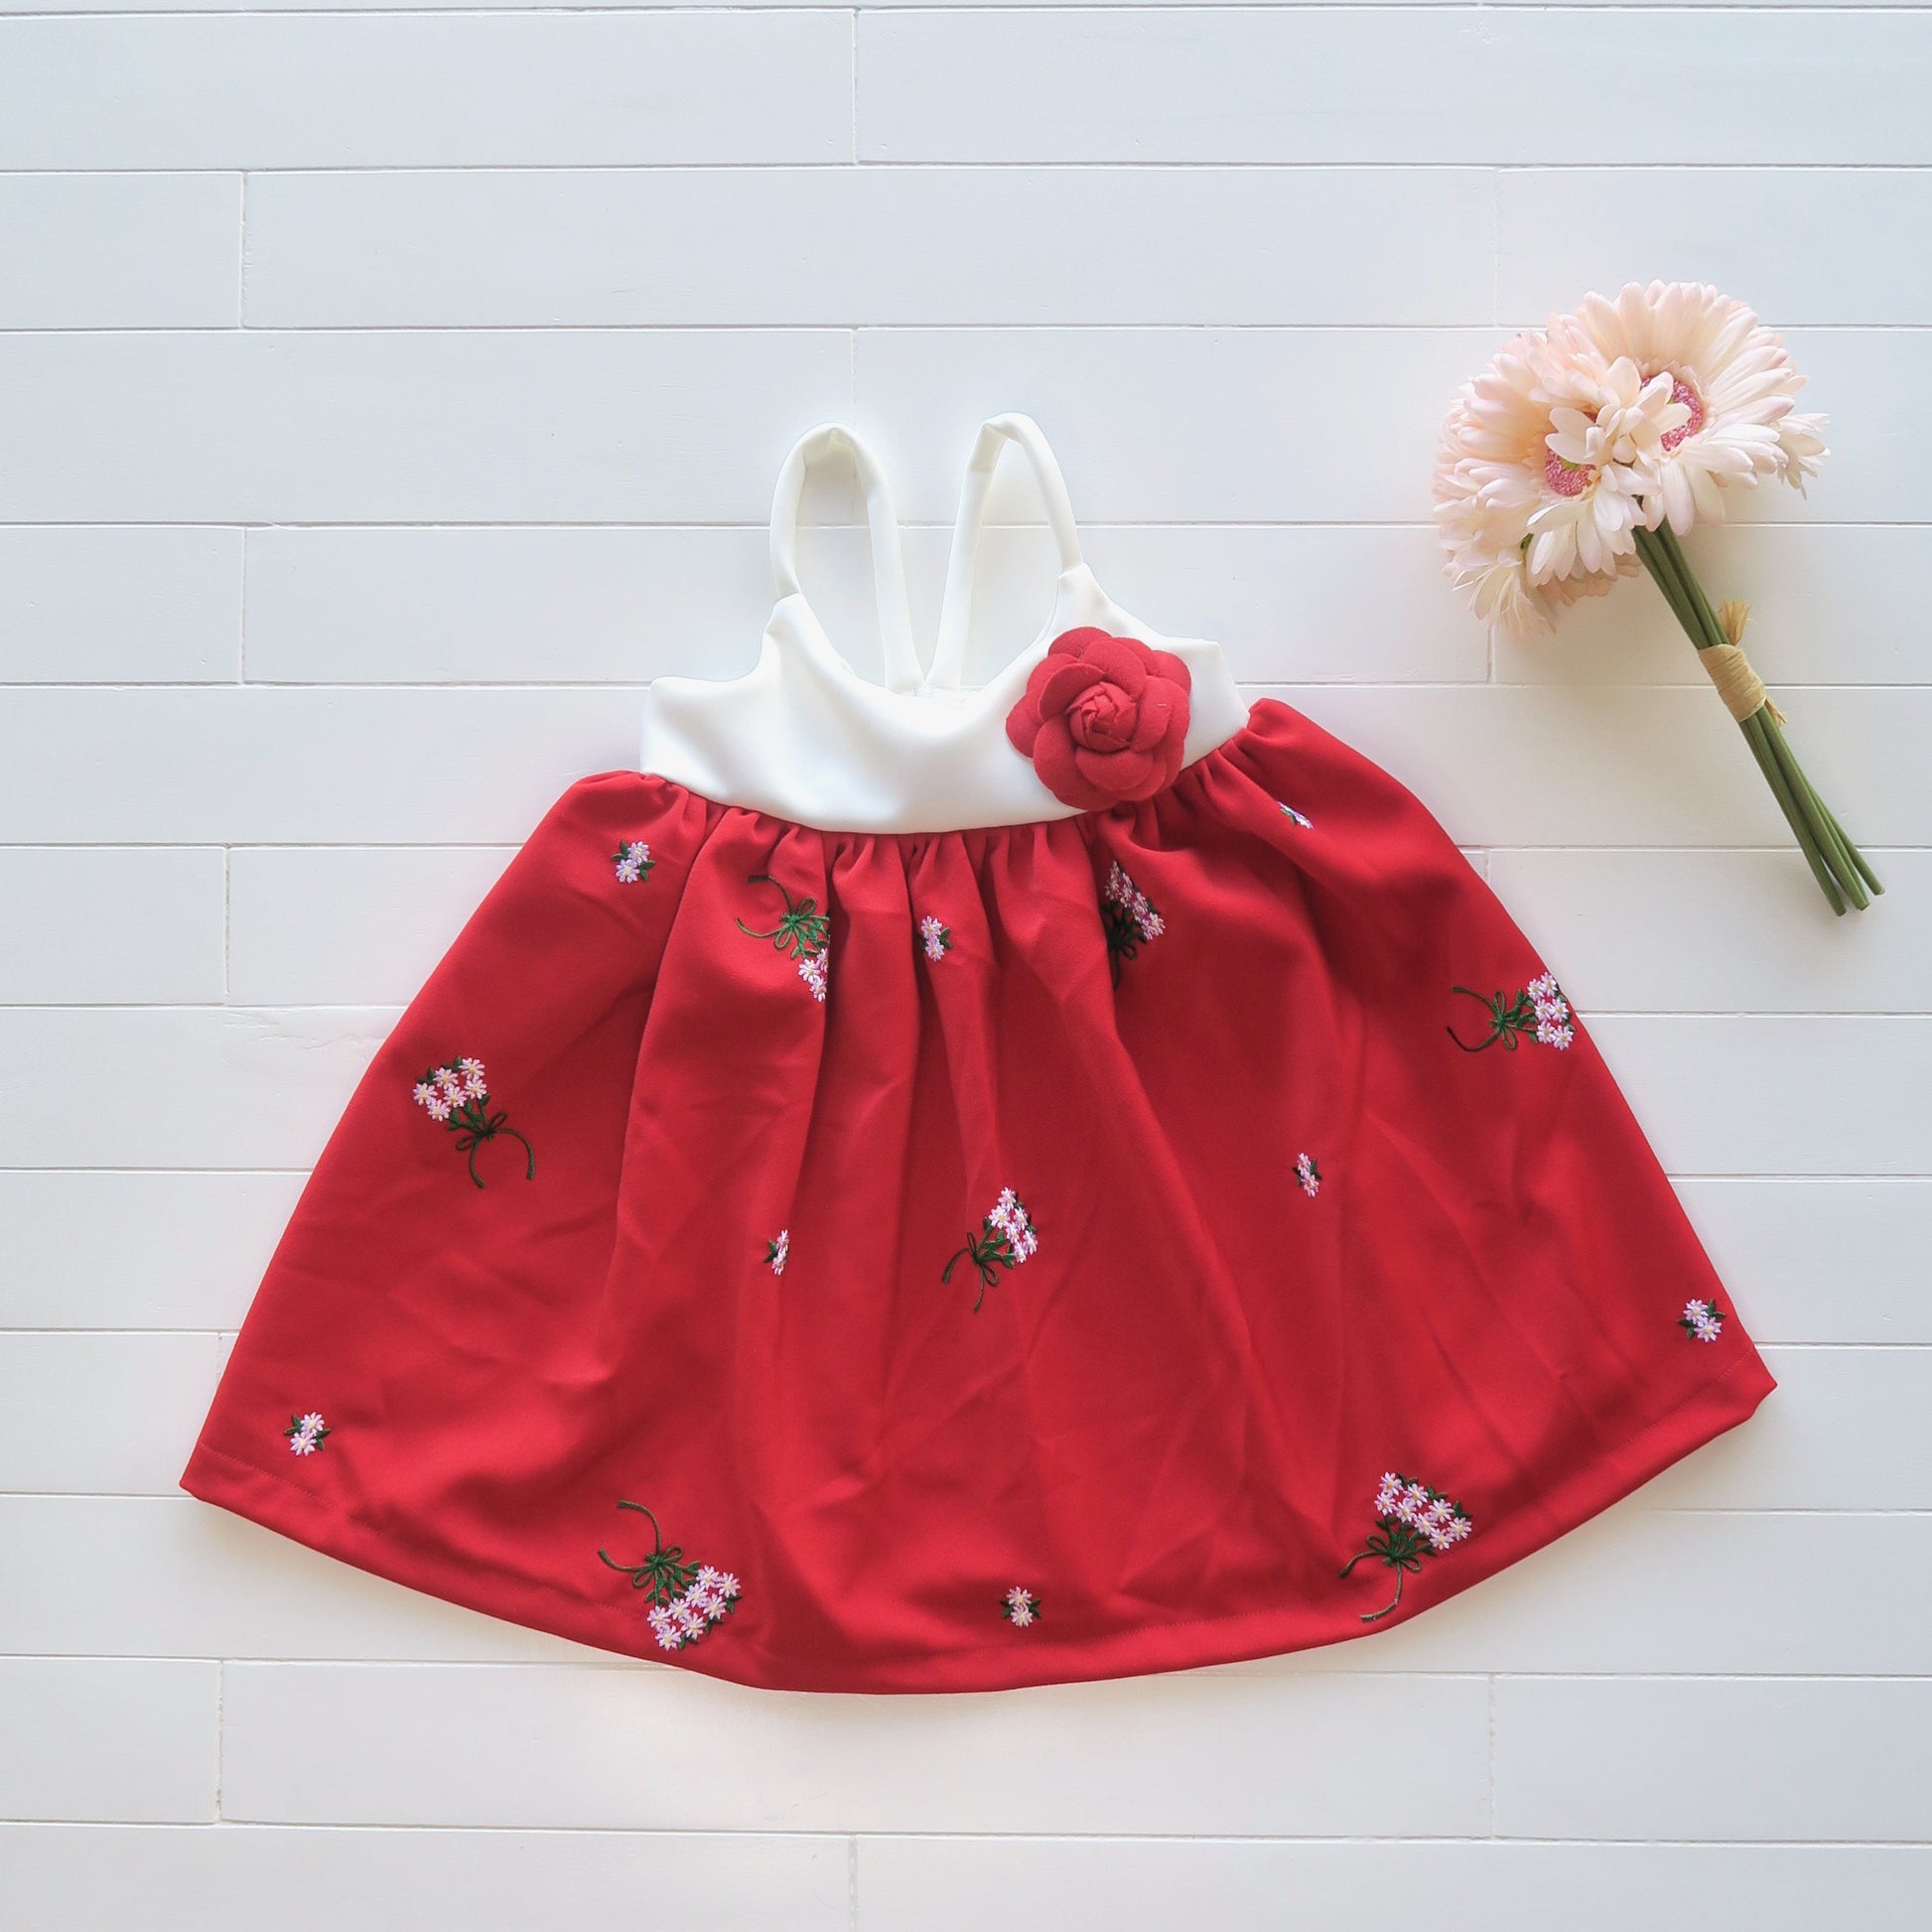 Primrose Dress in White Neoprene and Red Floral Embroidery - Lil' Tati